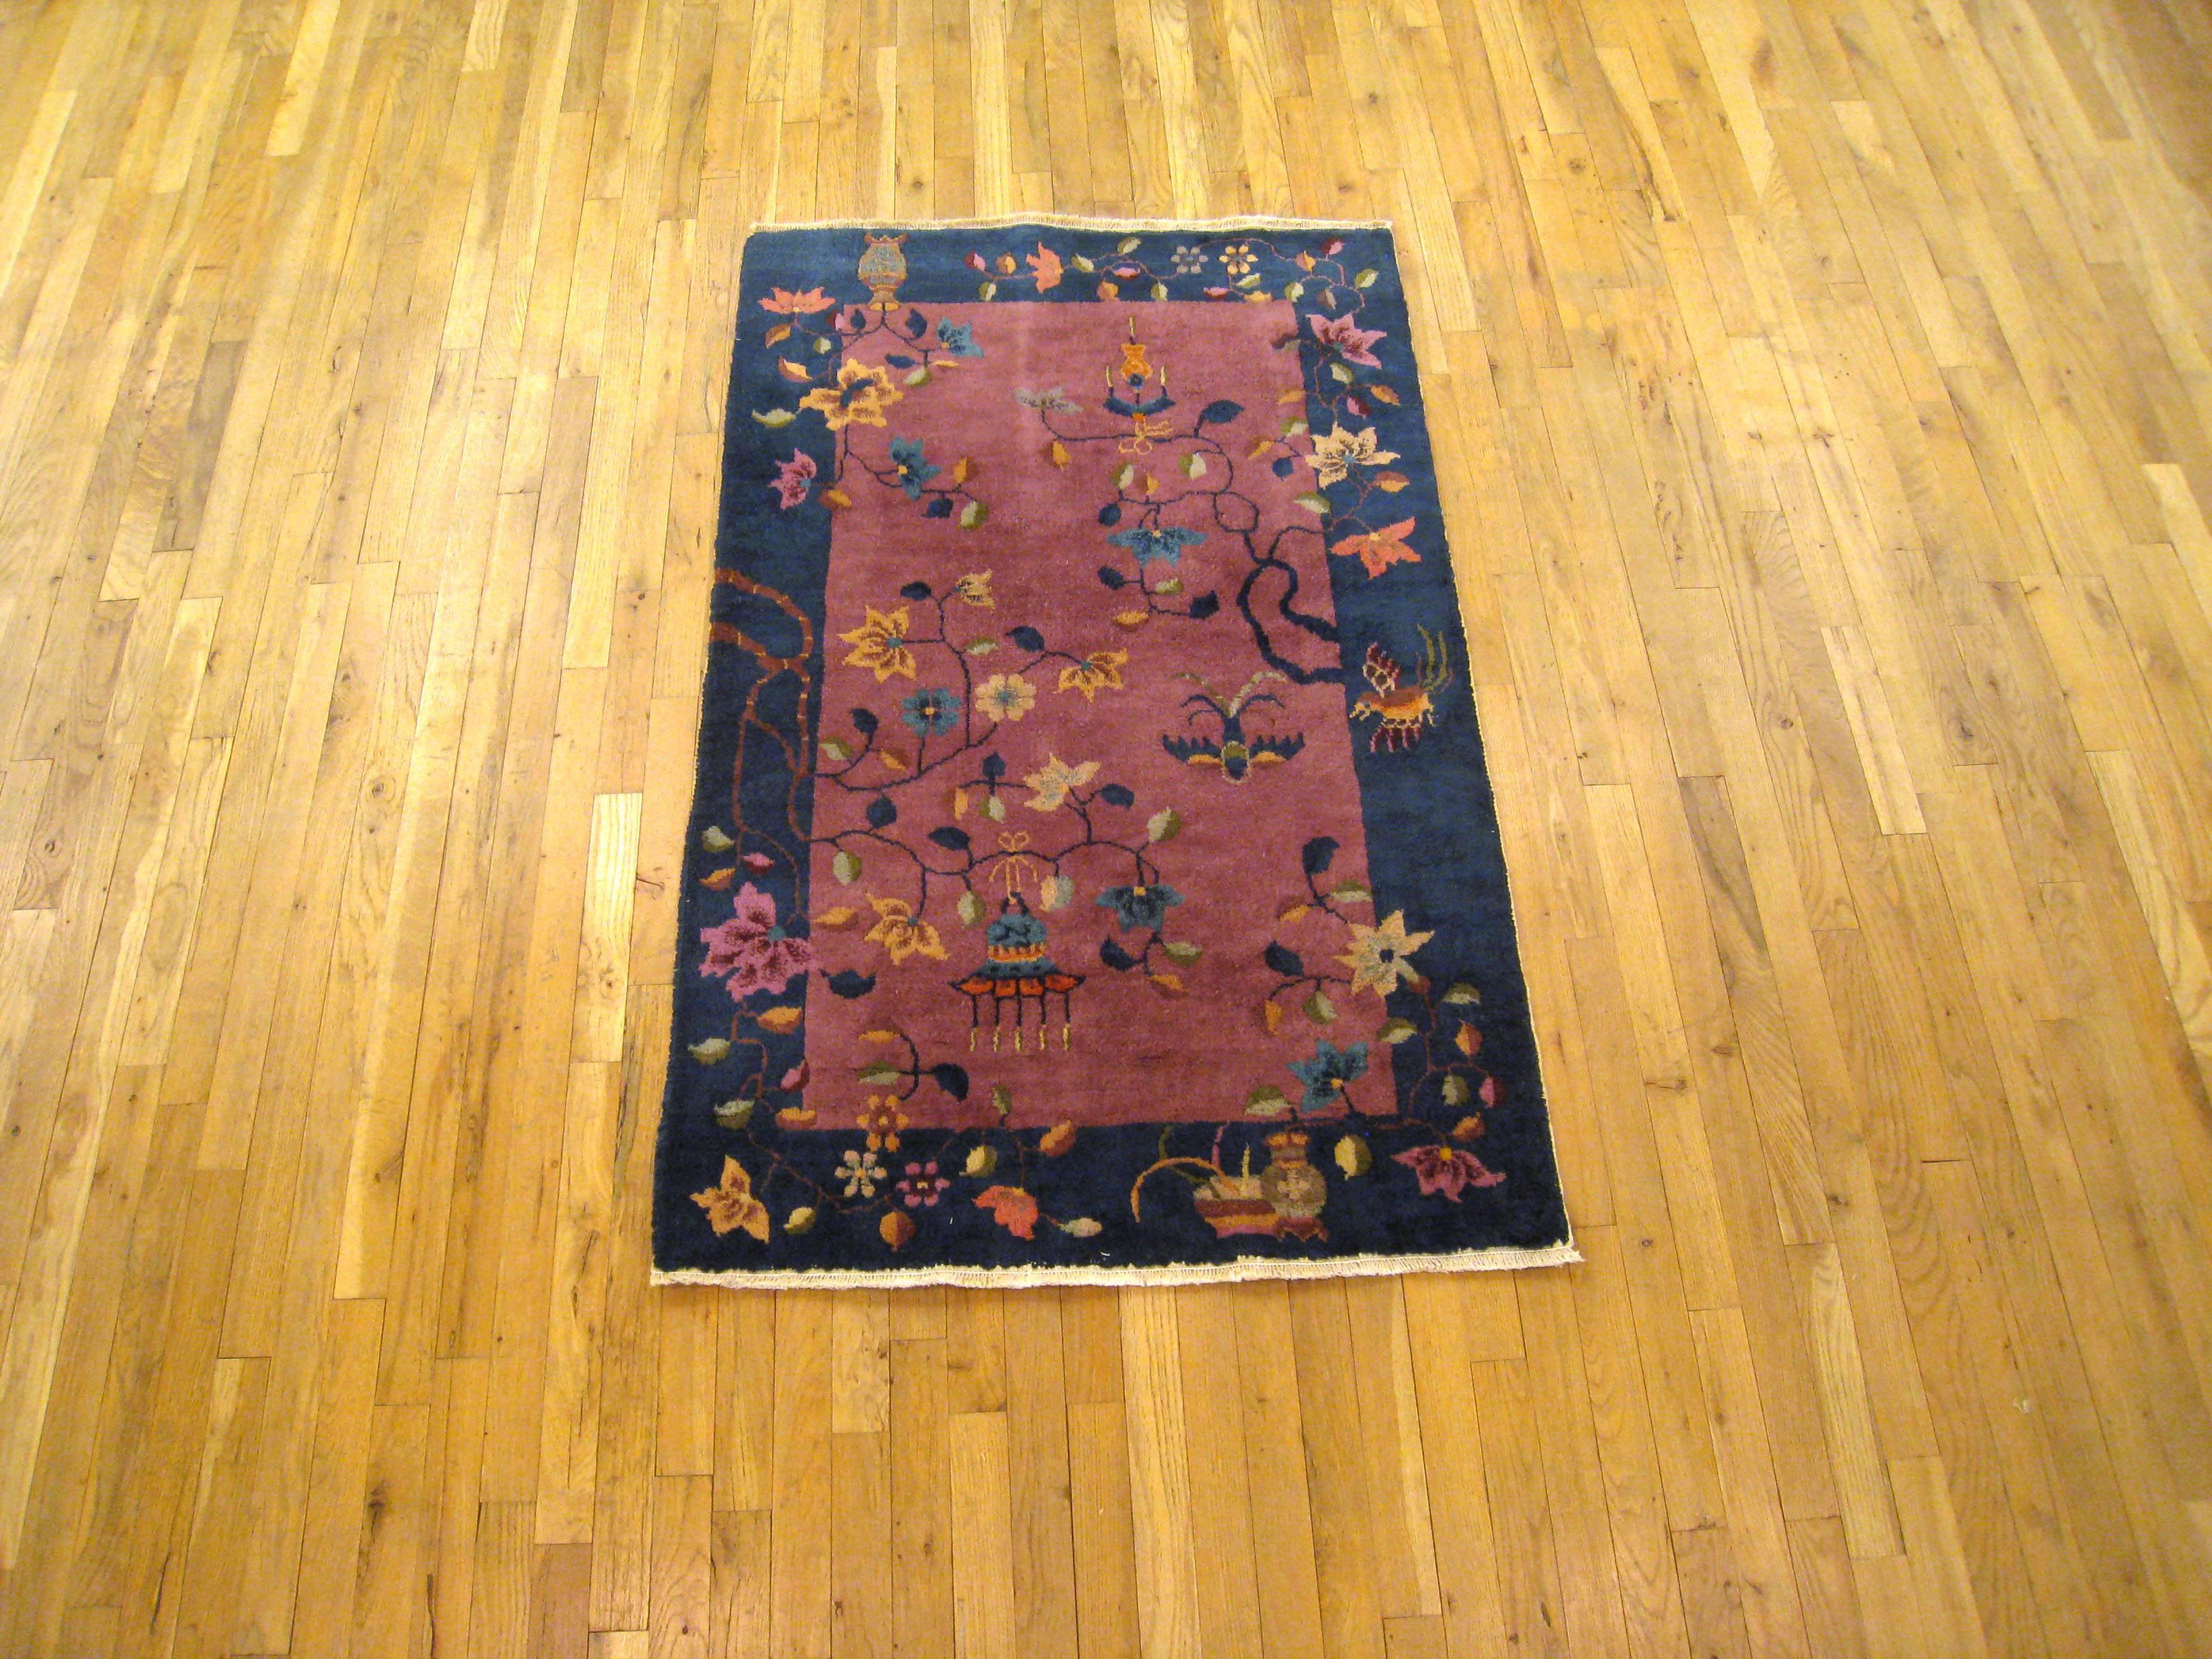 An antique Chinese Art Deco oriental rug, size 5'0 x 3'0, circa 1920. This lovely hand-knotted antique carpet features various Chinese motifs in the delightful central field, enclosed within a handsome outer border. Hand-made, with short to medium